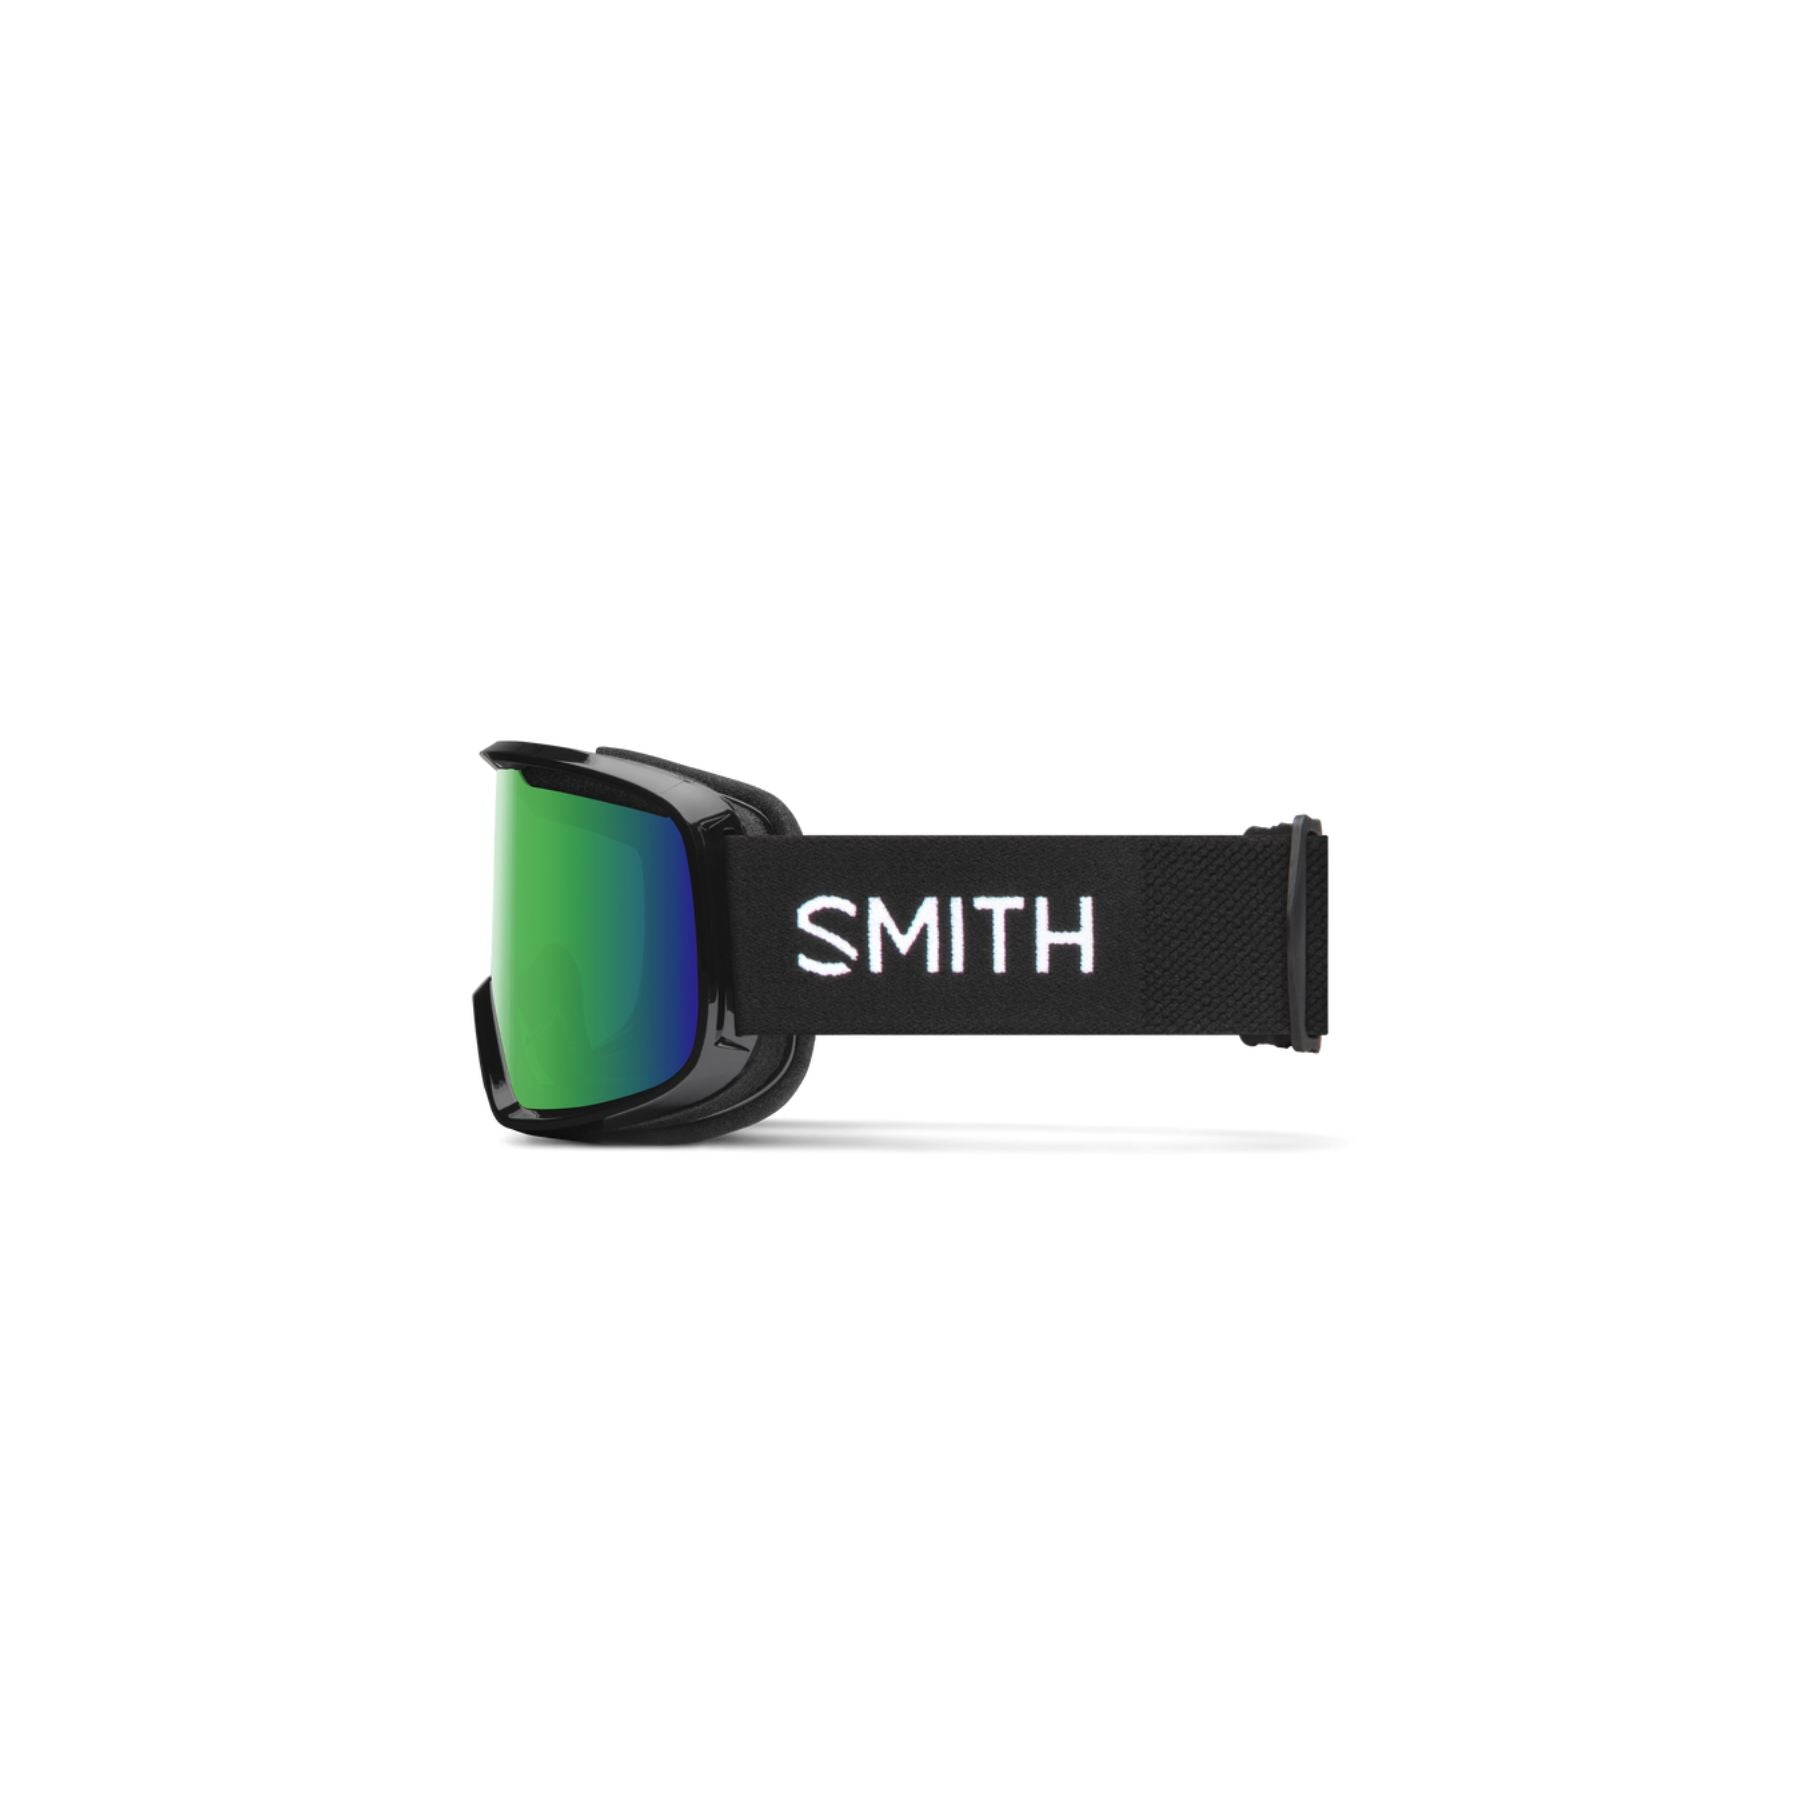 Smith Frontier Goggles in Black